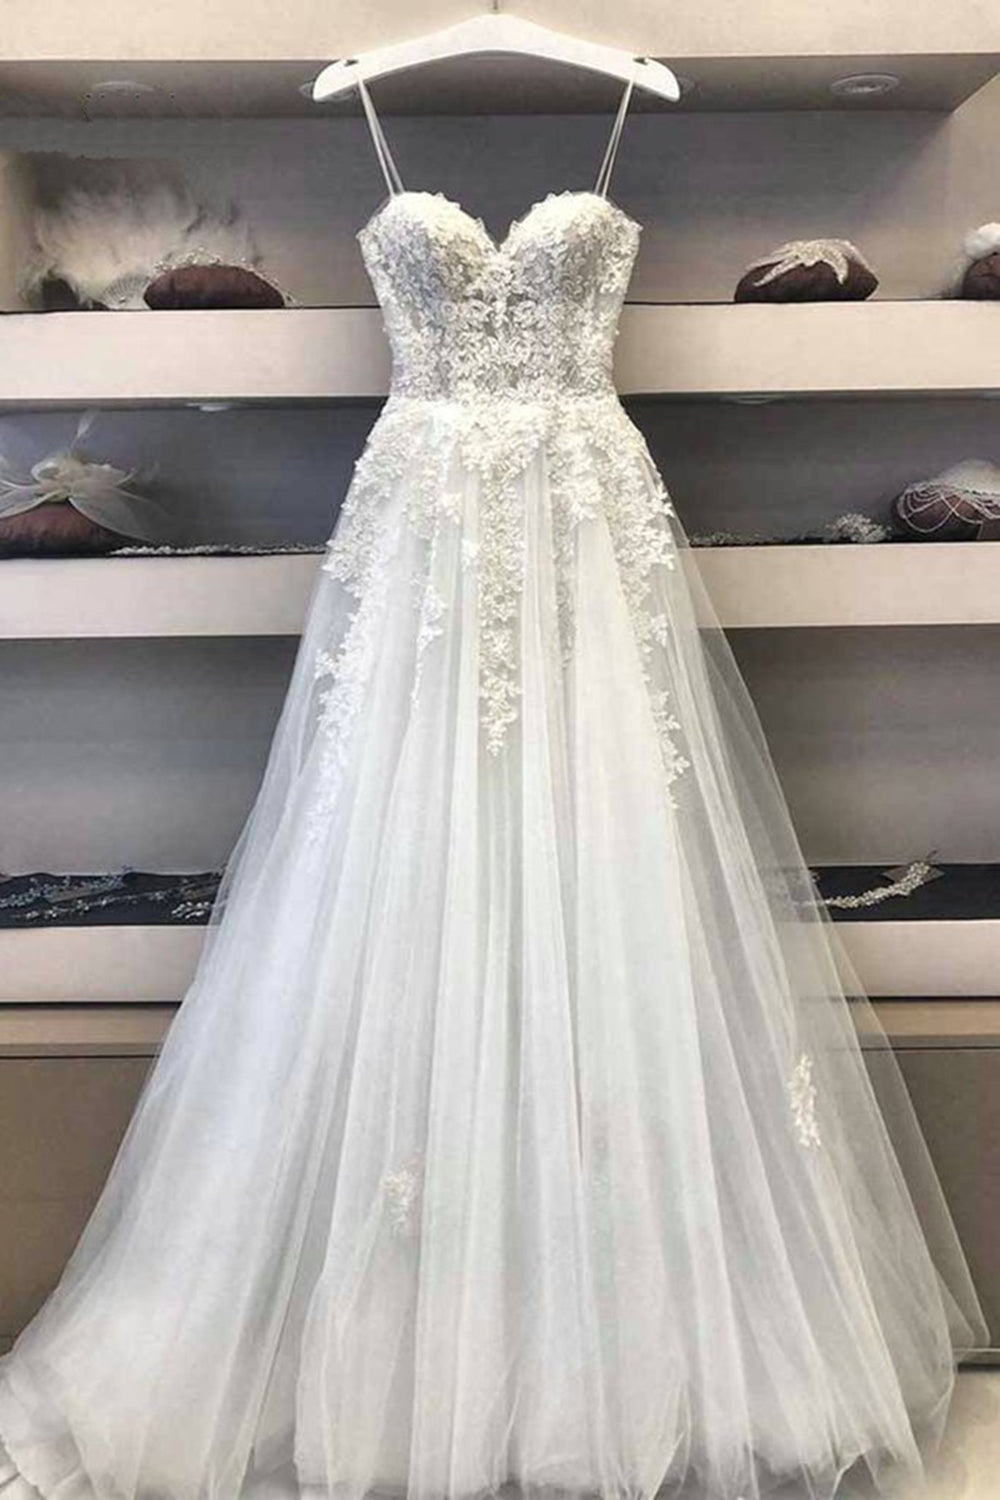 Princess Sweetheart Neck White Lace Prom Wedding Dresses, Ivory Lace Formal Dresses, White Evening Dresses EP1441